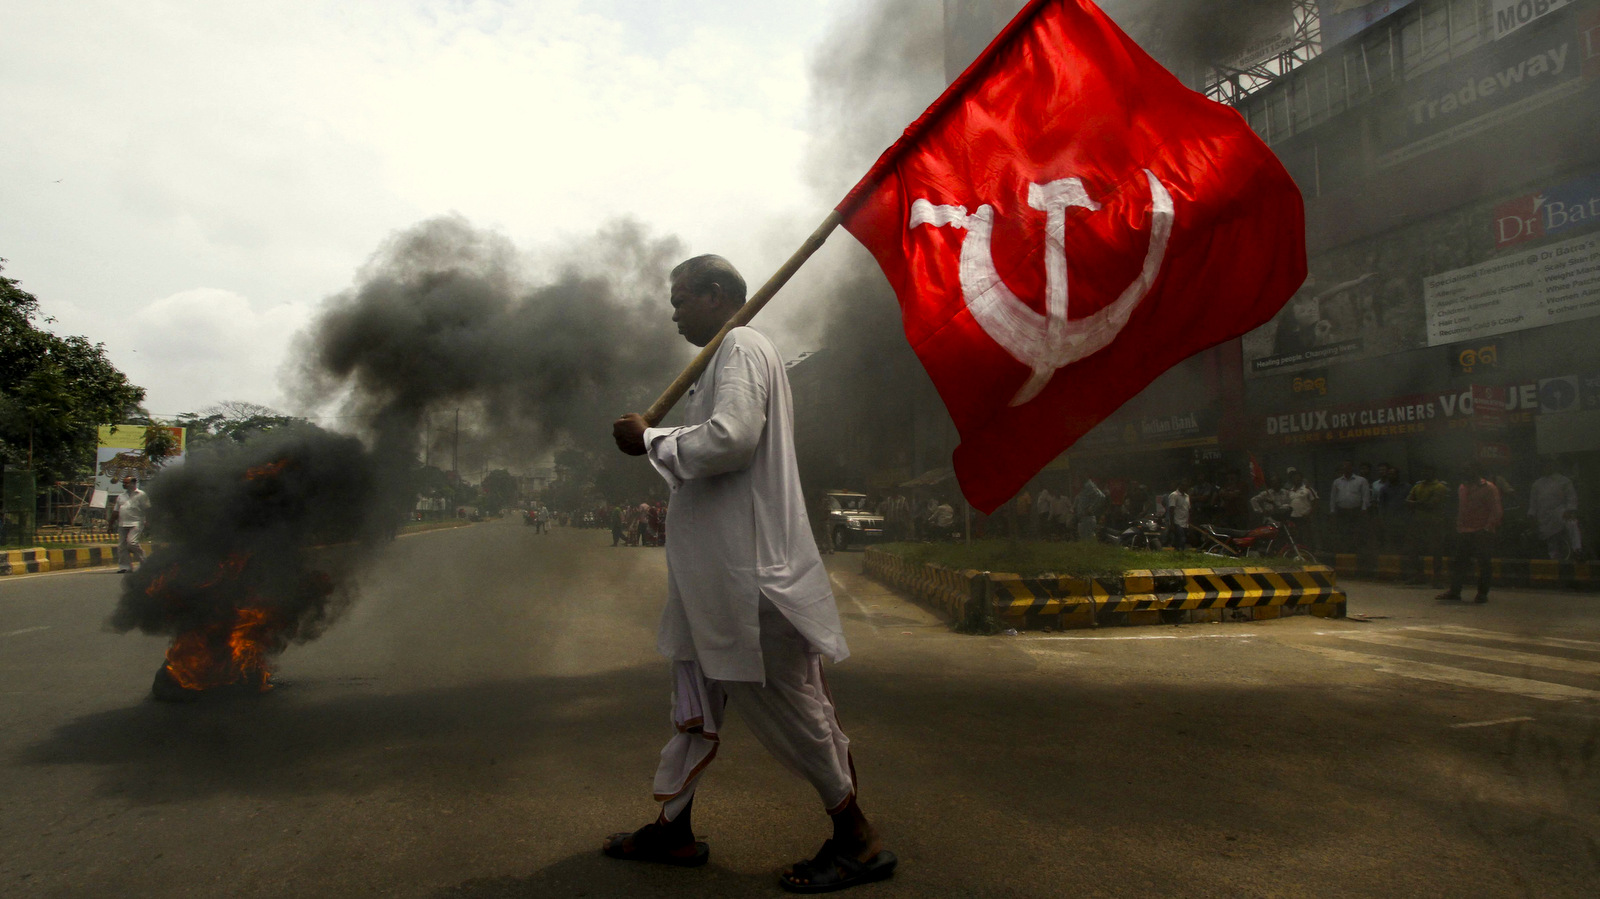 An activist of the Indian trade union group holds a party flag as he walks past a burning tyre set up as a road blockade during a daylong nationwide strike in the eastern Indian city Bhubaneswar, India, Wednesday, Sept. 2, 2015. Normal life was affected in several parts of the state following a day-long nationwide general strike called by ten central trade unions to protest changes in labour laws and privatisation of Public Sector Undertaking’s (PSU) by the ruling Bharatiya Janata Party (BJP) government. (AP Photo/Biswaranjan Rout)